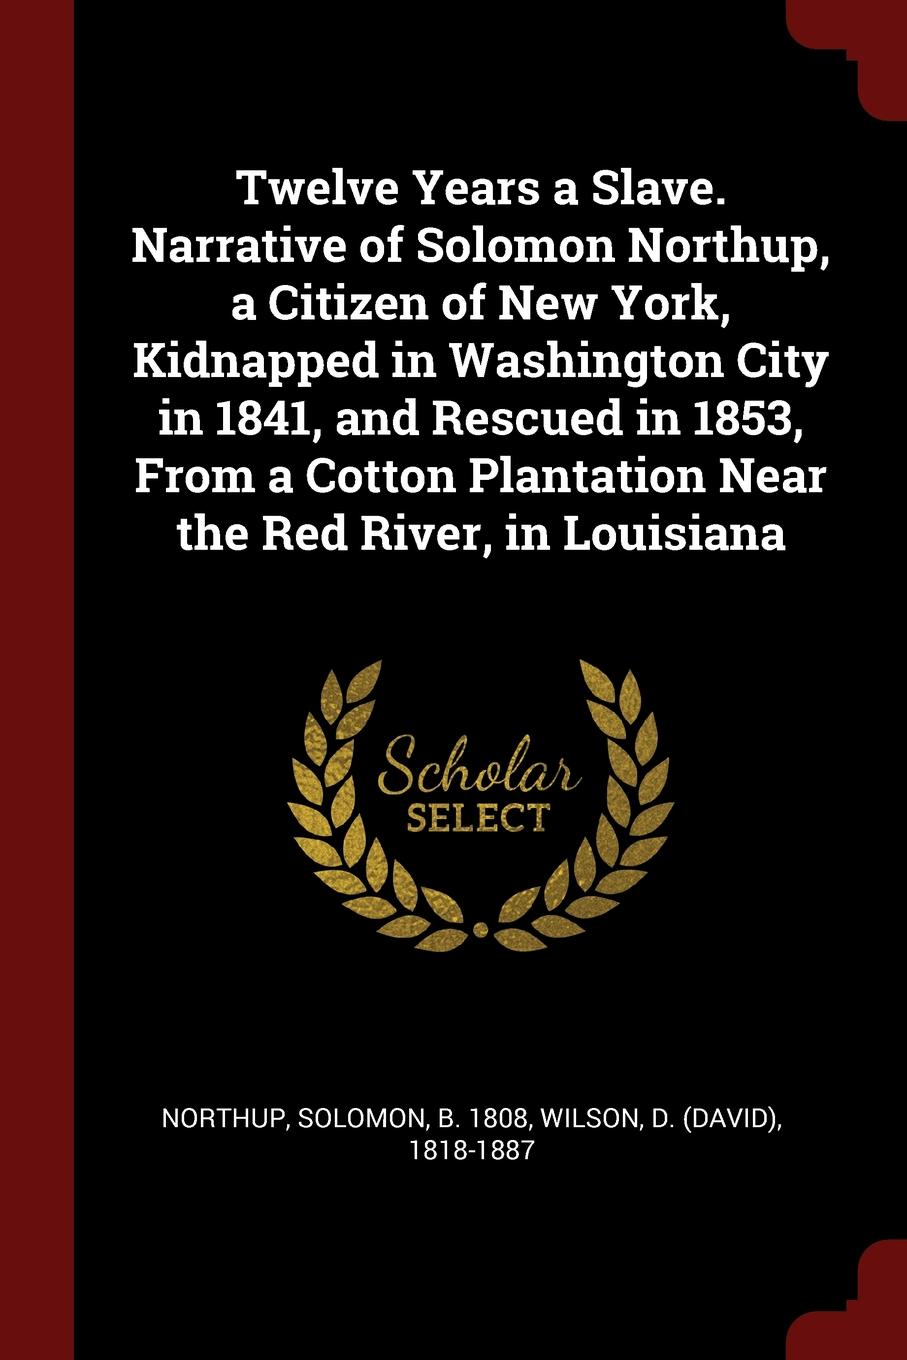 Twelve Years a Slave. Narrative of Solomon Northup, a Citizen of New York, Kidnapped in Washington City in 1841, and Rescued in 1853, From a Cotton Plantation Near the Red River, in Louisiana